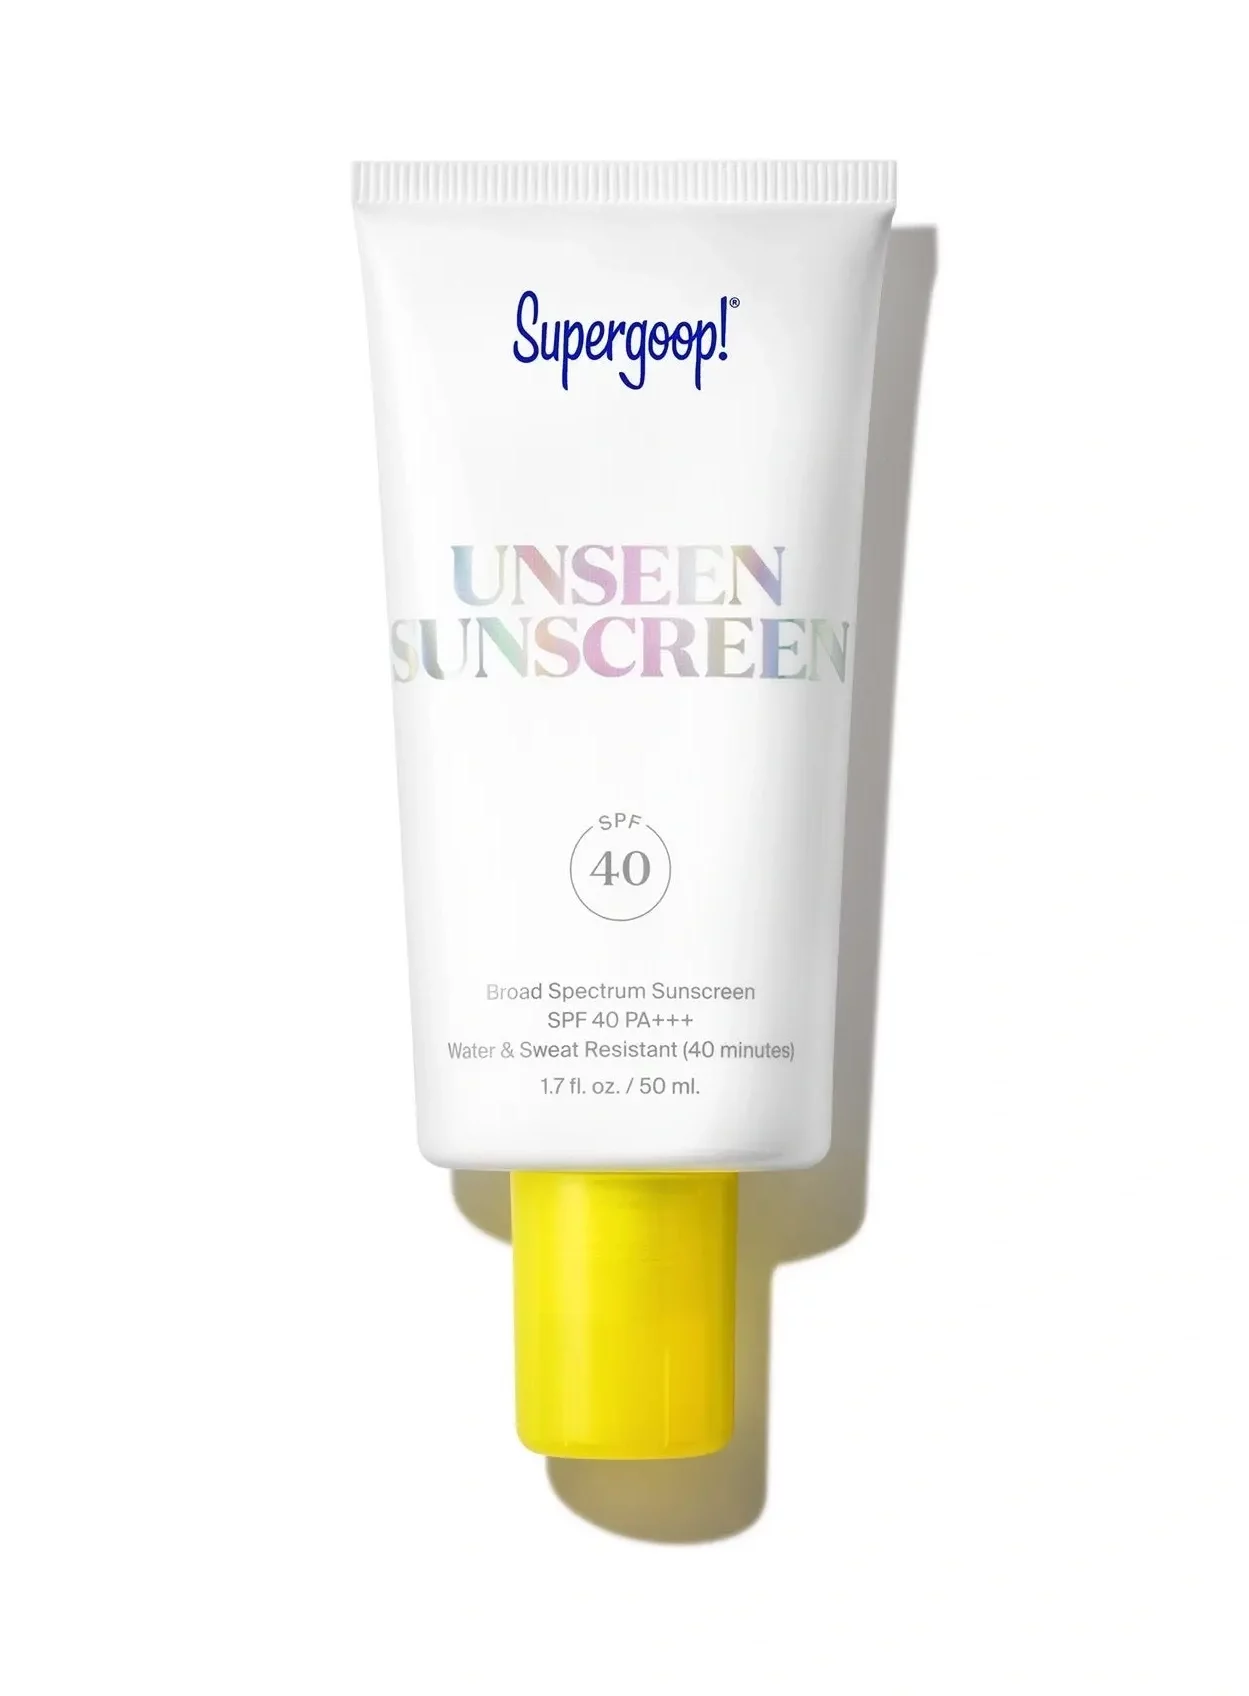 This is my favorite sunscreen to use for my everyday makeup looks. https://www.kellysnider.com/